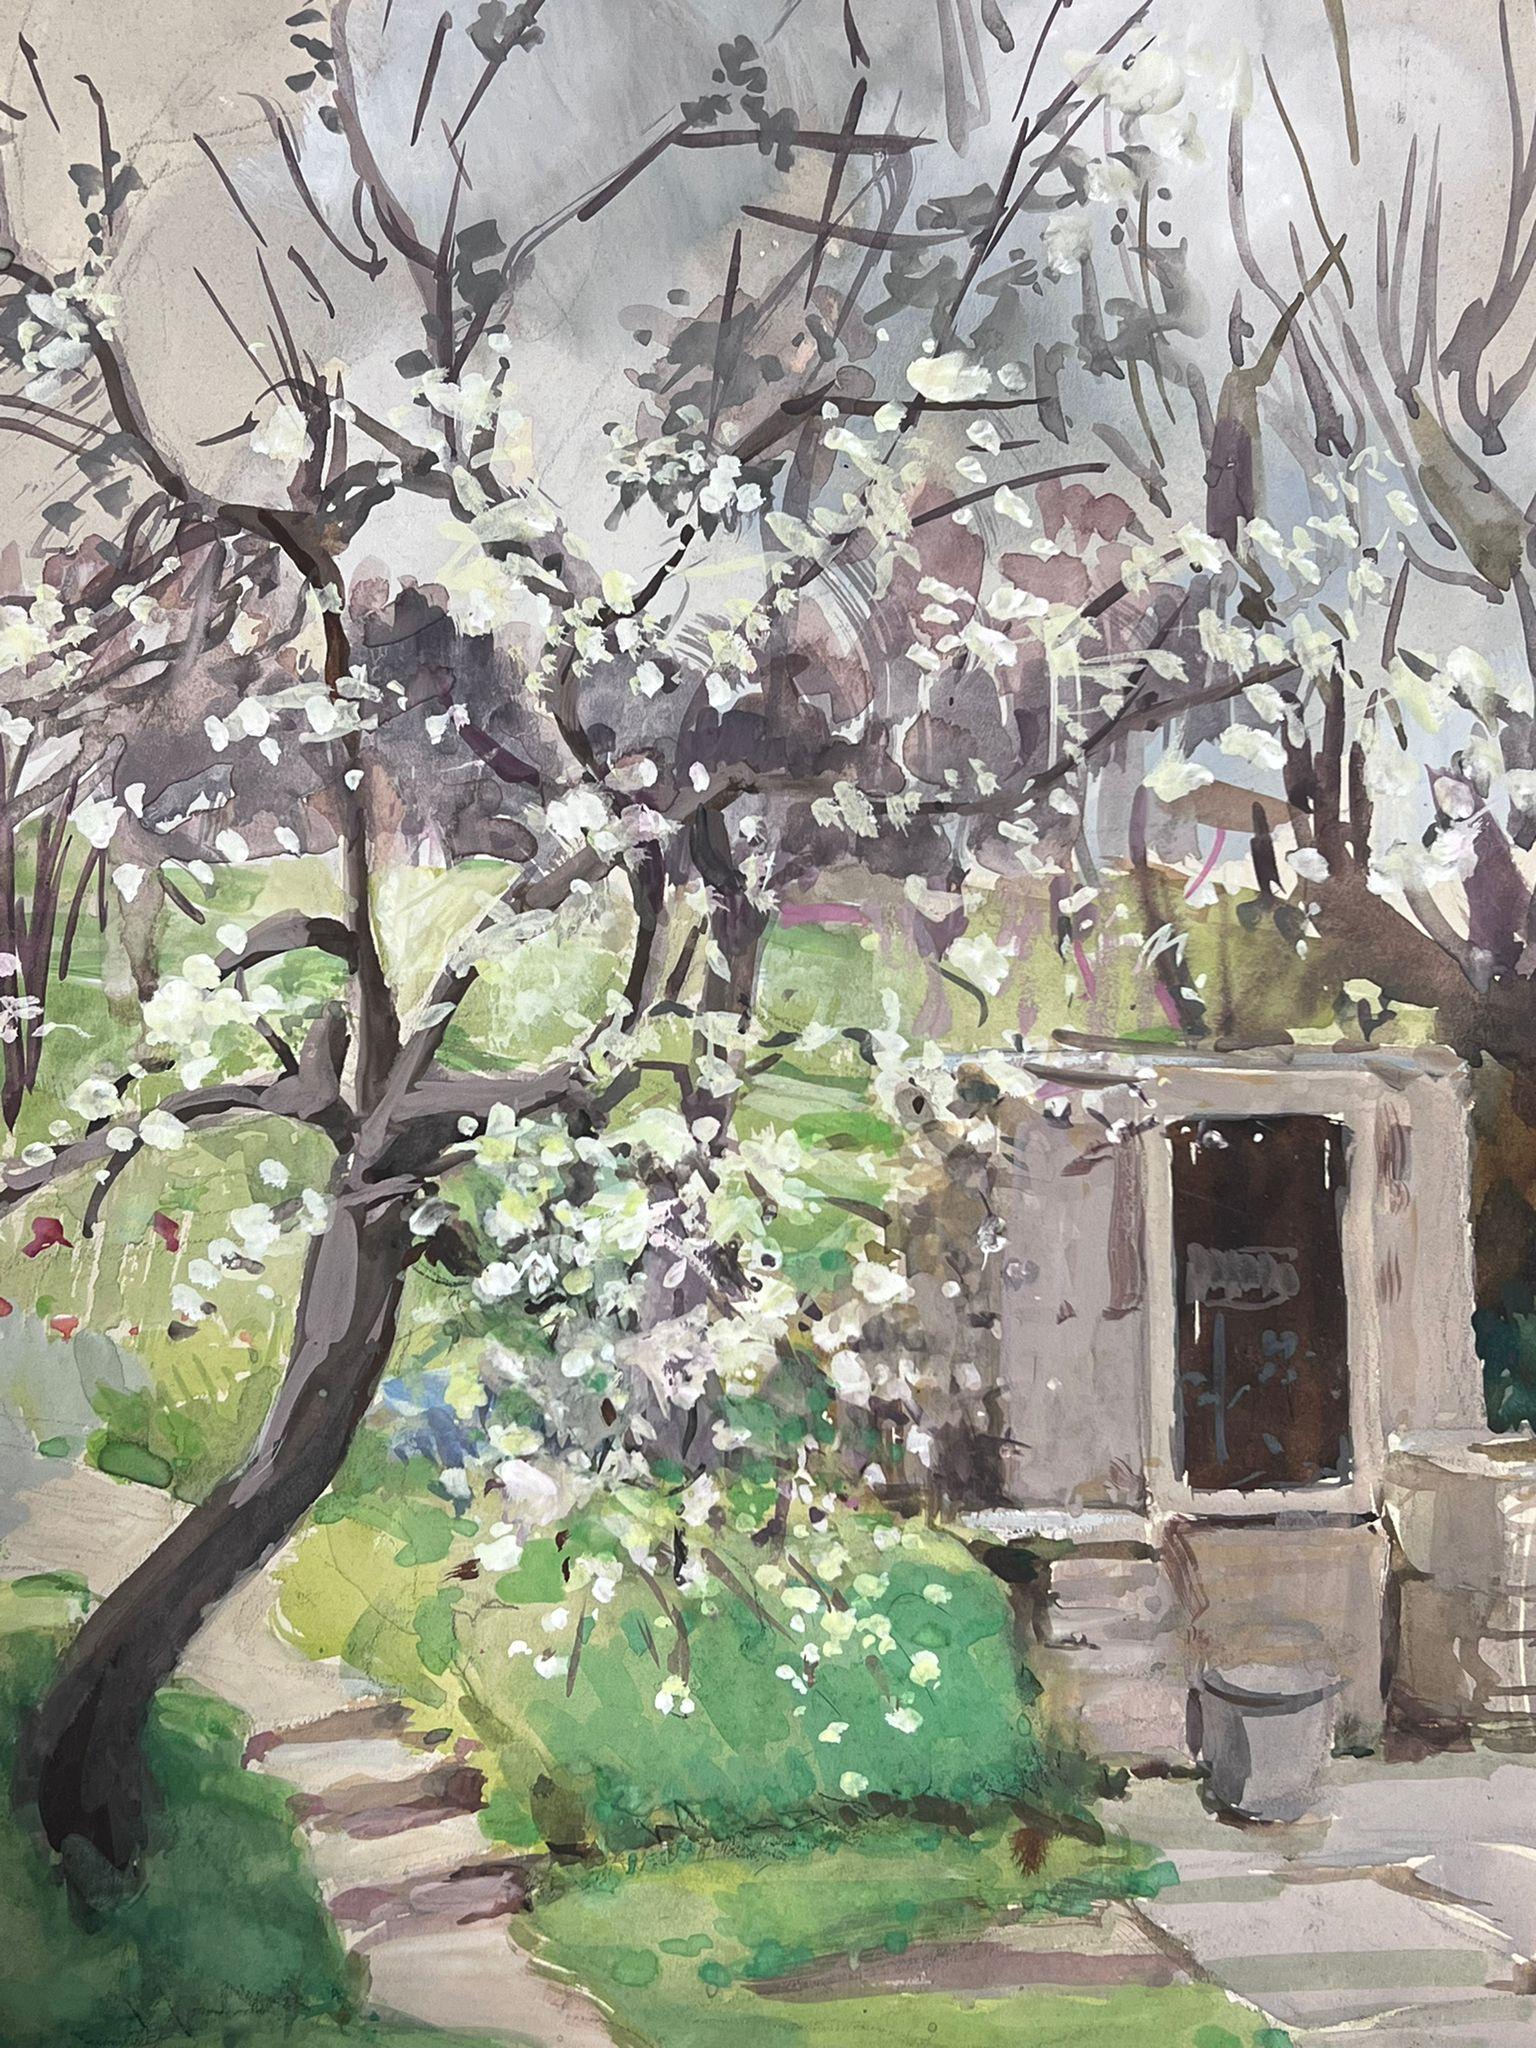 Garden Blossom Tree
by Louise Alix, French 1950's Impressionist 
gouache on artist paper, unframed
painting: 14.5 x 12.5 inches
provenance: from a large private collection of this artists work in Northern France
condition: original, good and sound